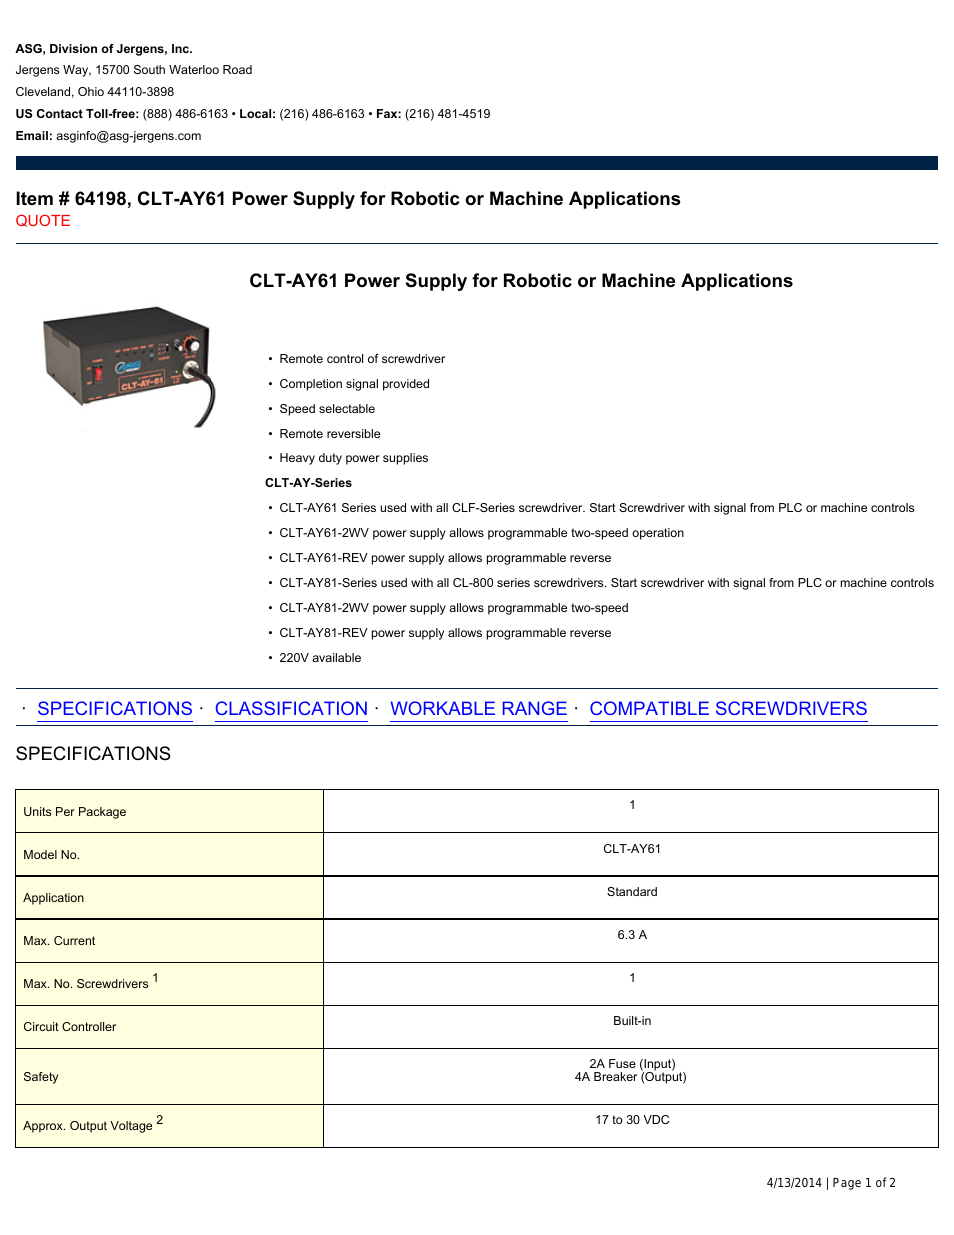 64198 CLT-AY61 Power Supply for Robotic or Machine Applications